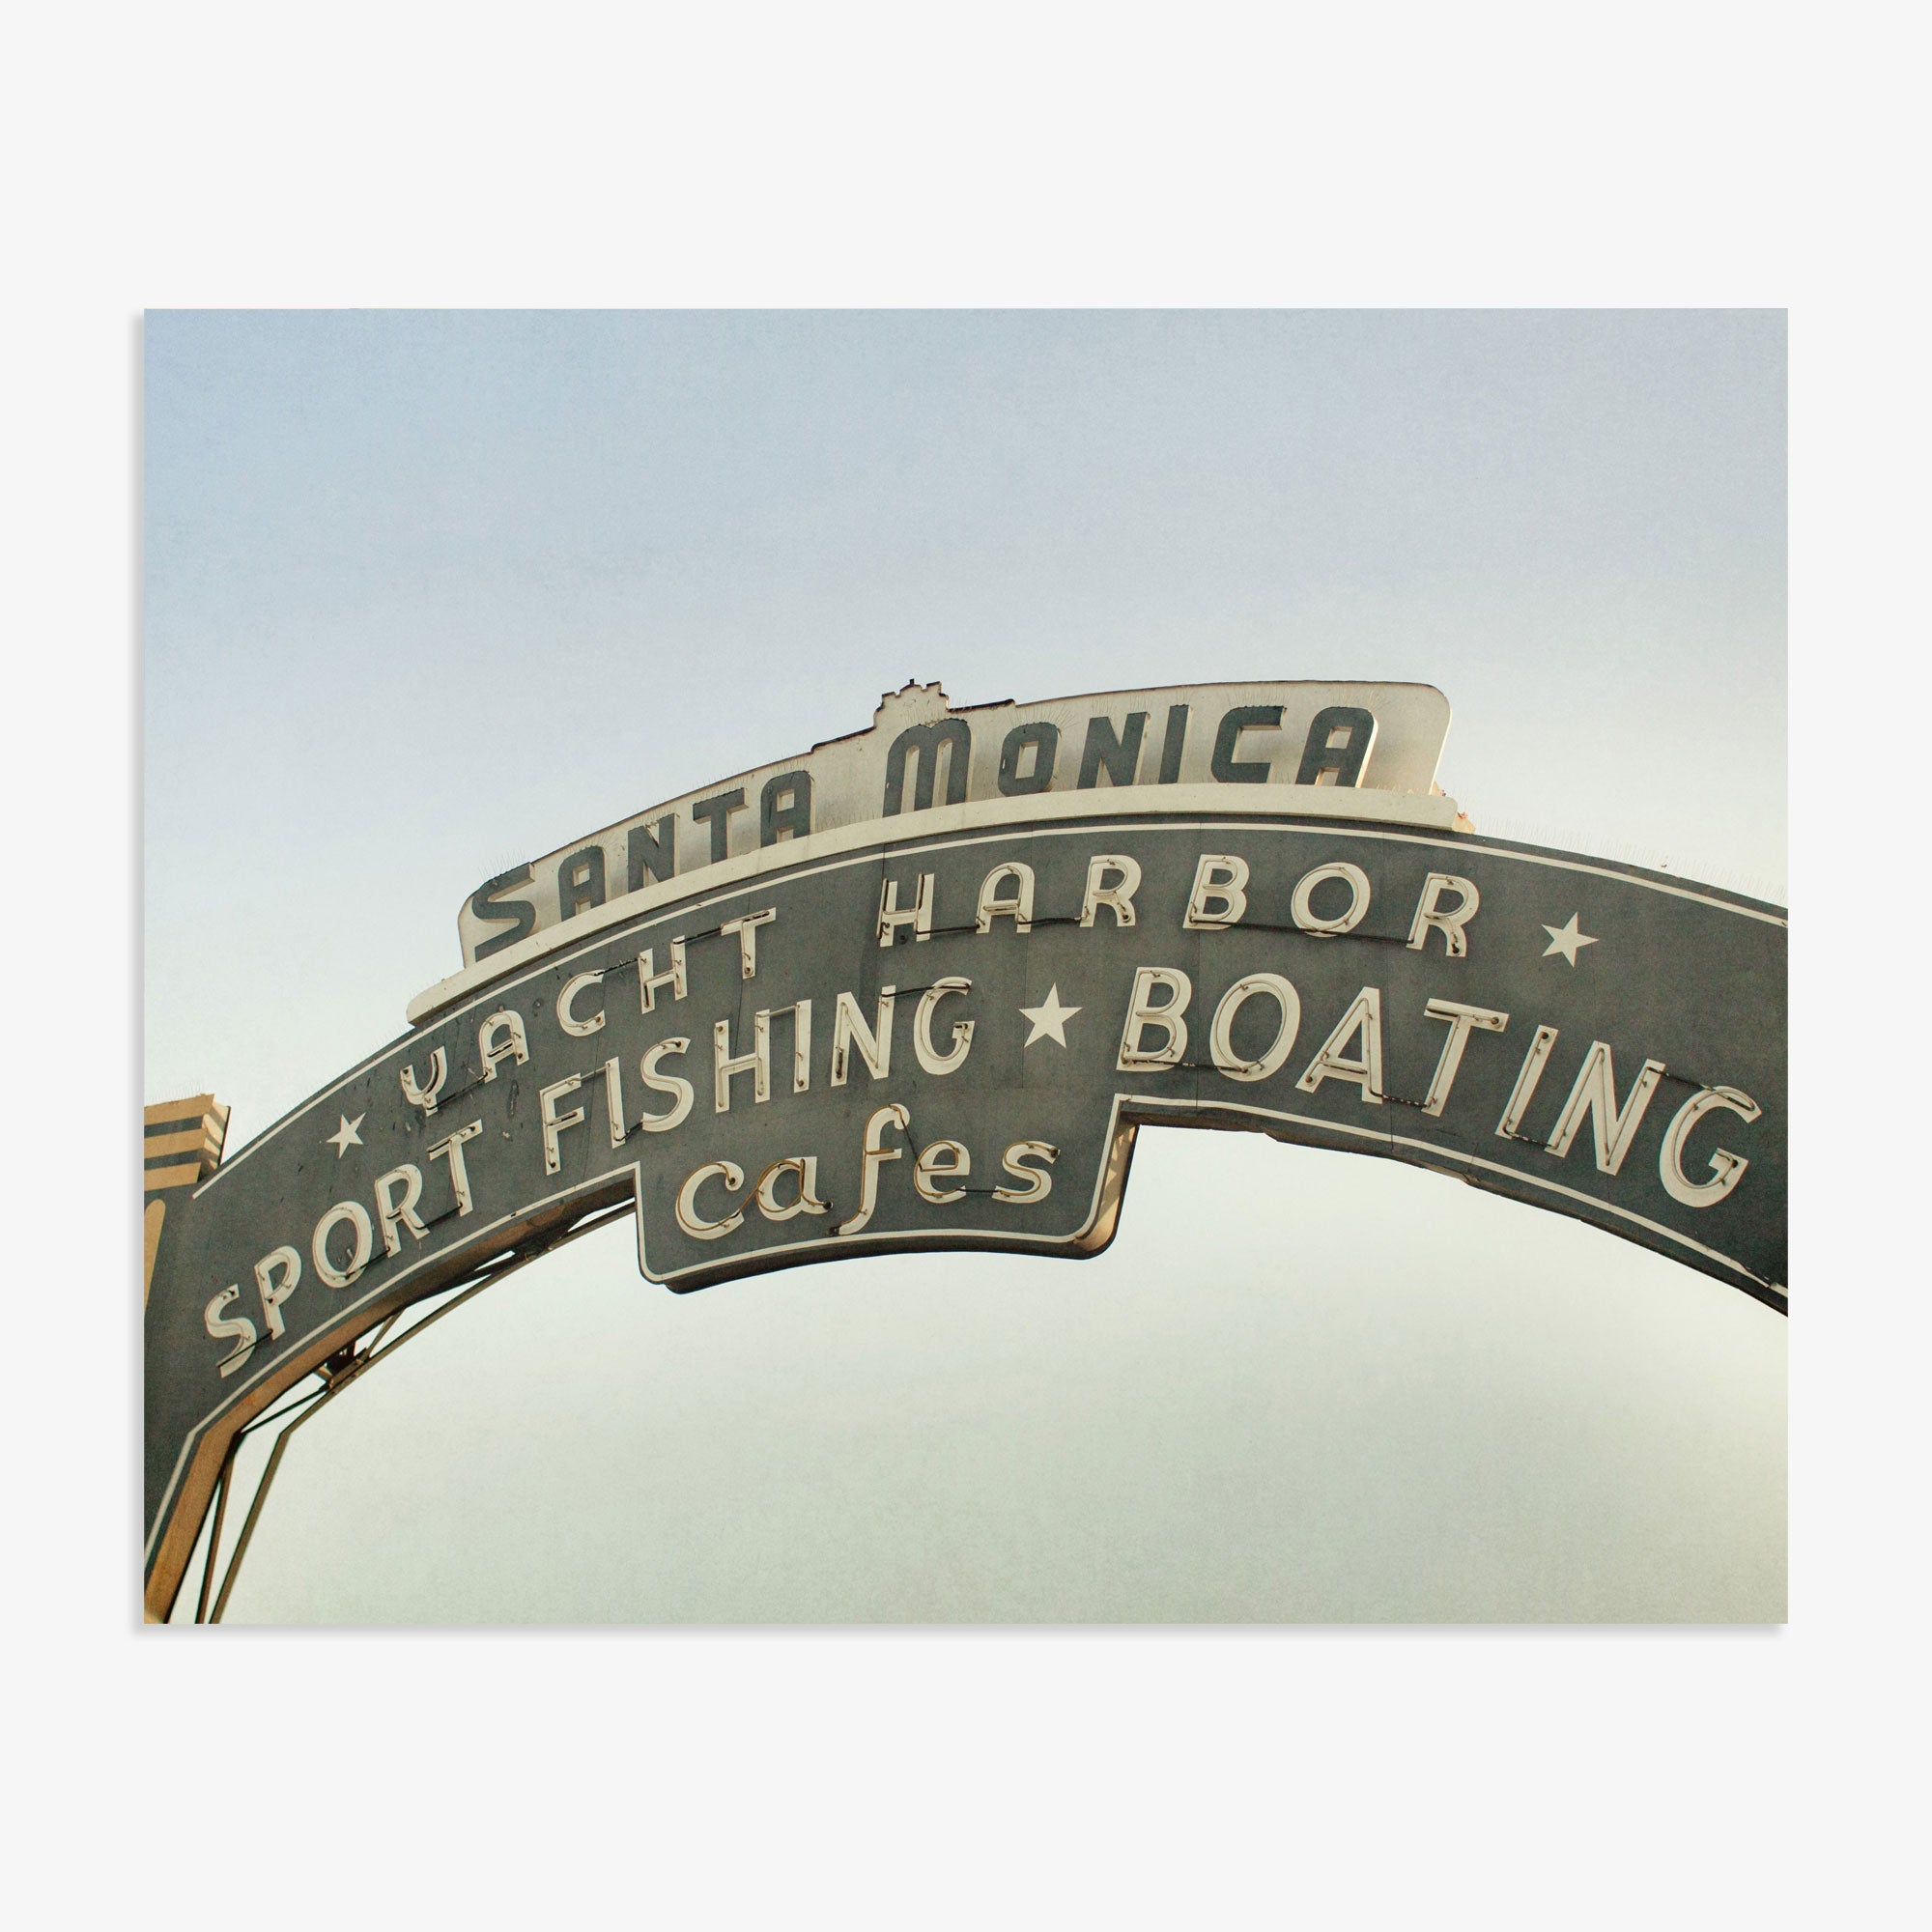 The image shows the iconic Santa Monica Pier arch sign with the text &quot;yacht harbor, sport fishing, boating, cafes&quot; against a clear sky on the Los Angeles California Print, &#39;Santa Monica Pier Blues&#39; by Offley Green.